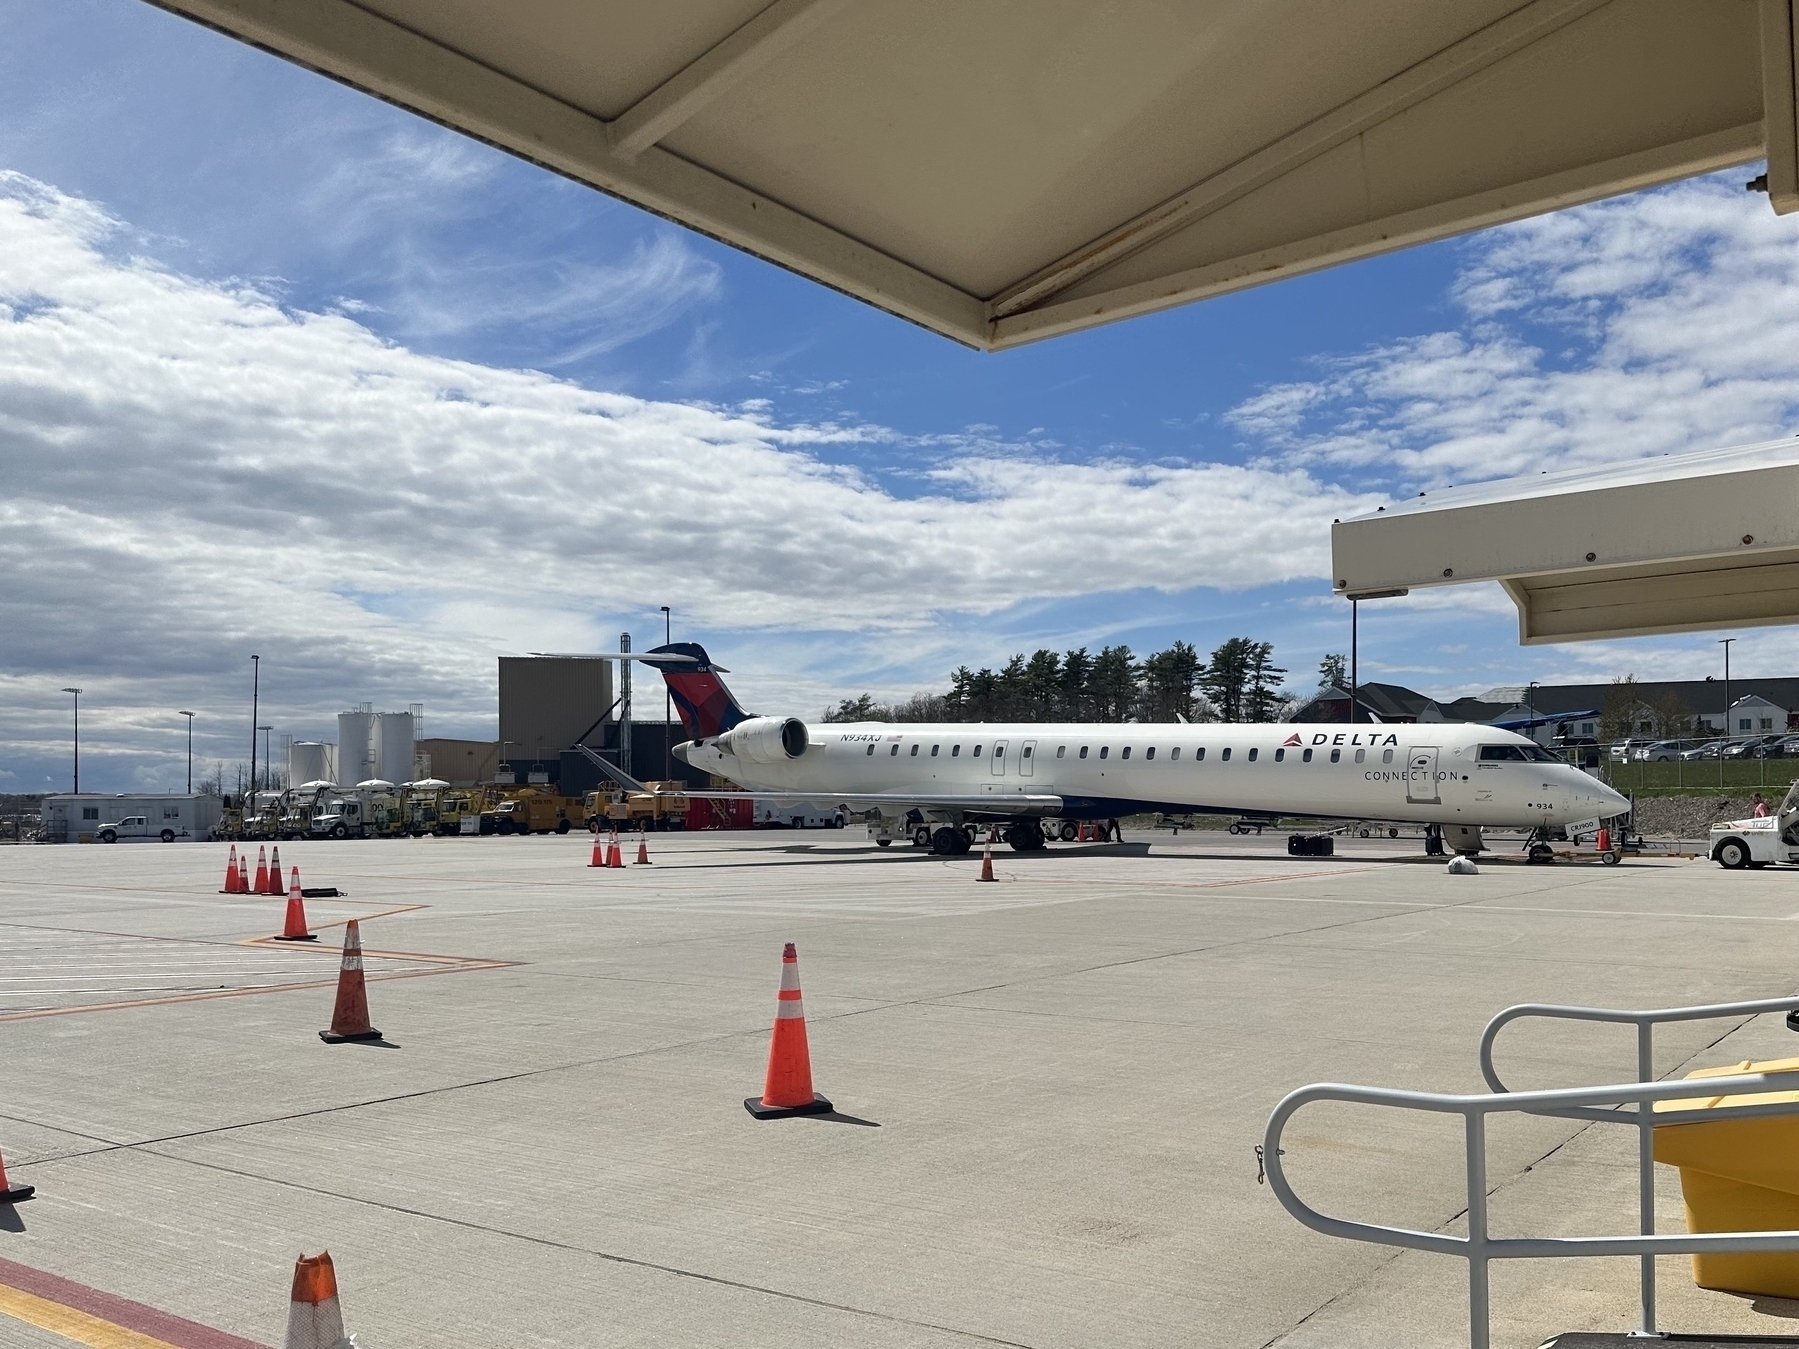 A Delta Connection aircraft is parked on the airport tarmac, with ground support equipment and vehicles nearby, under a partly cloudy sky.